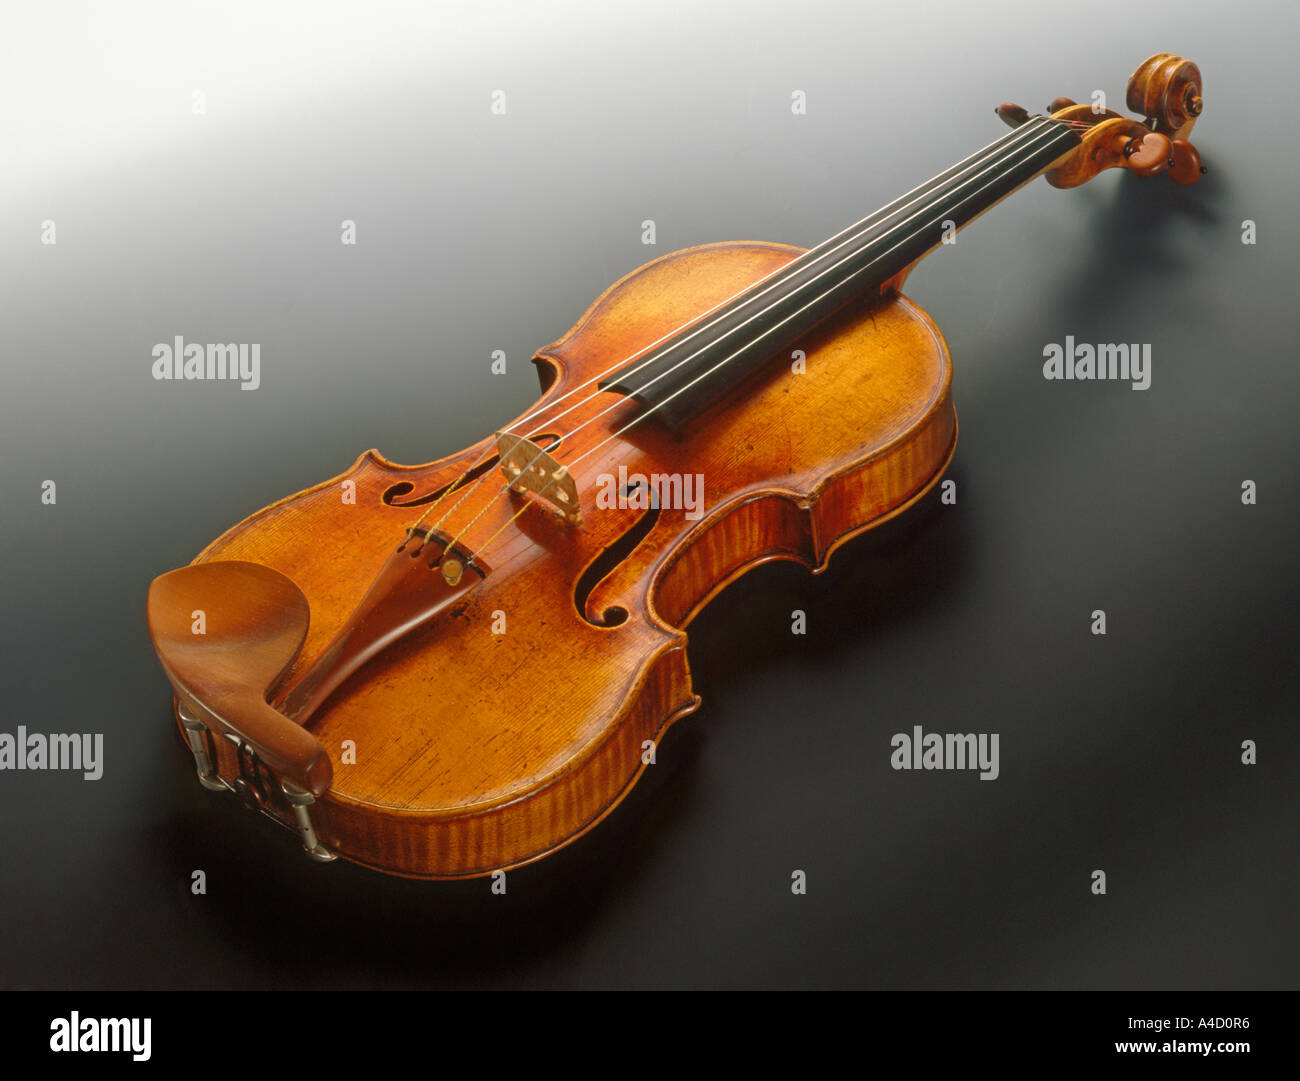 A violin made by Stradivarius and owned by Yehudi Menhuin. Stock Photo